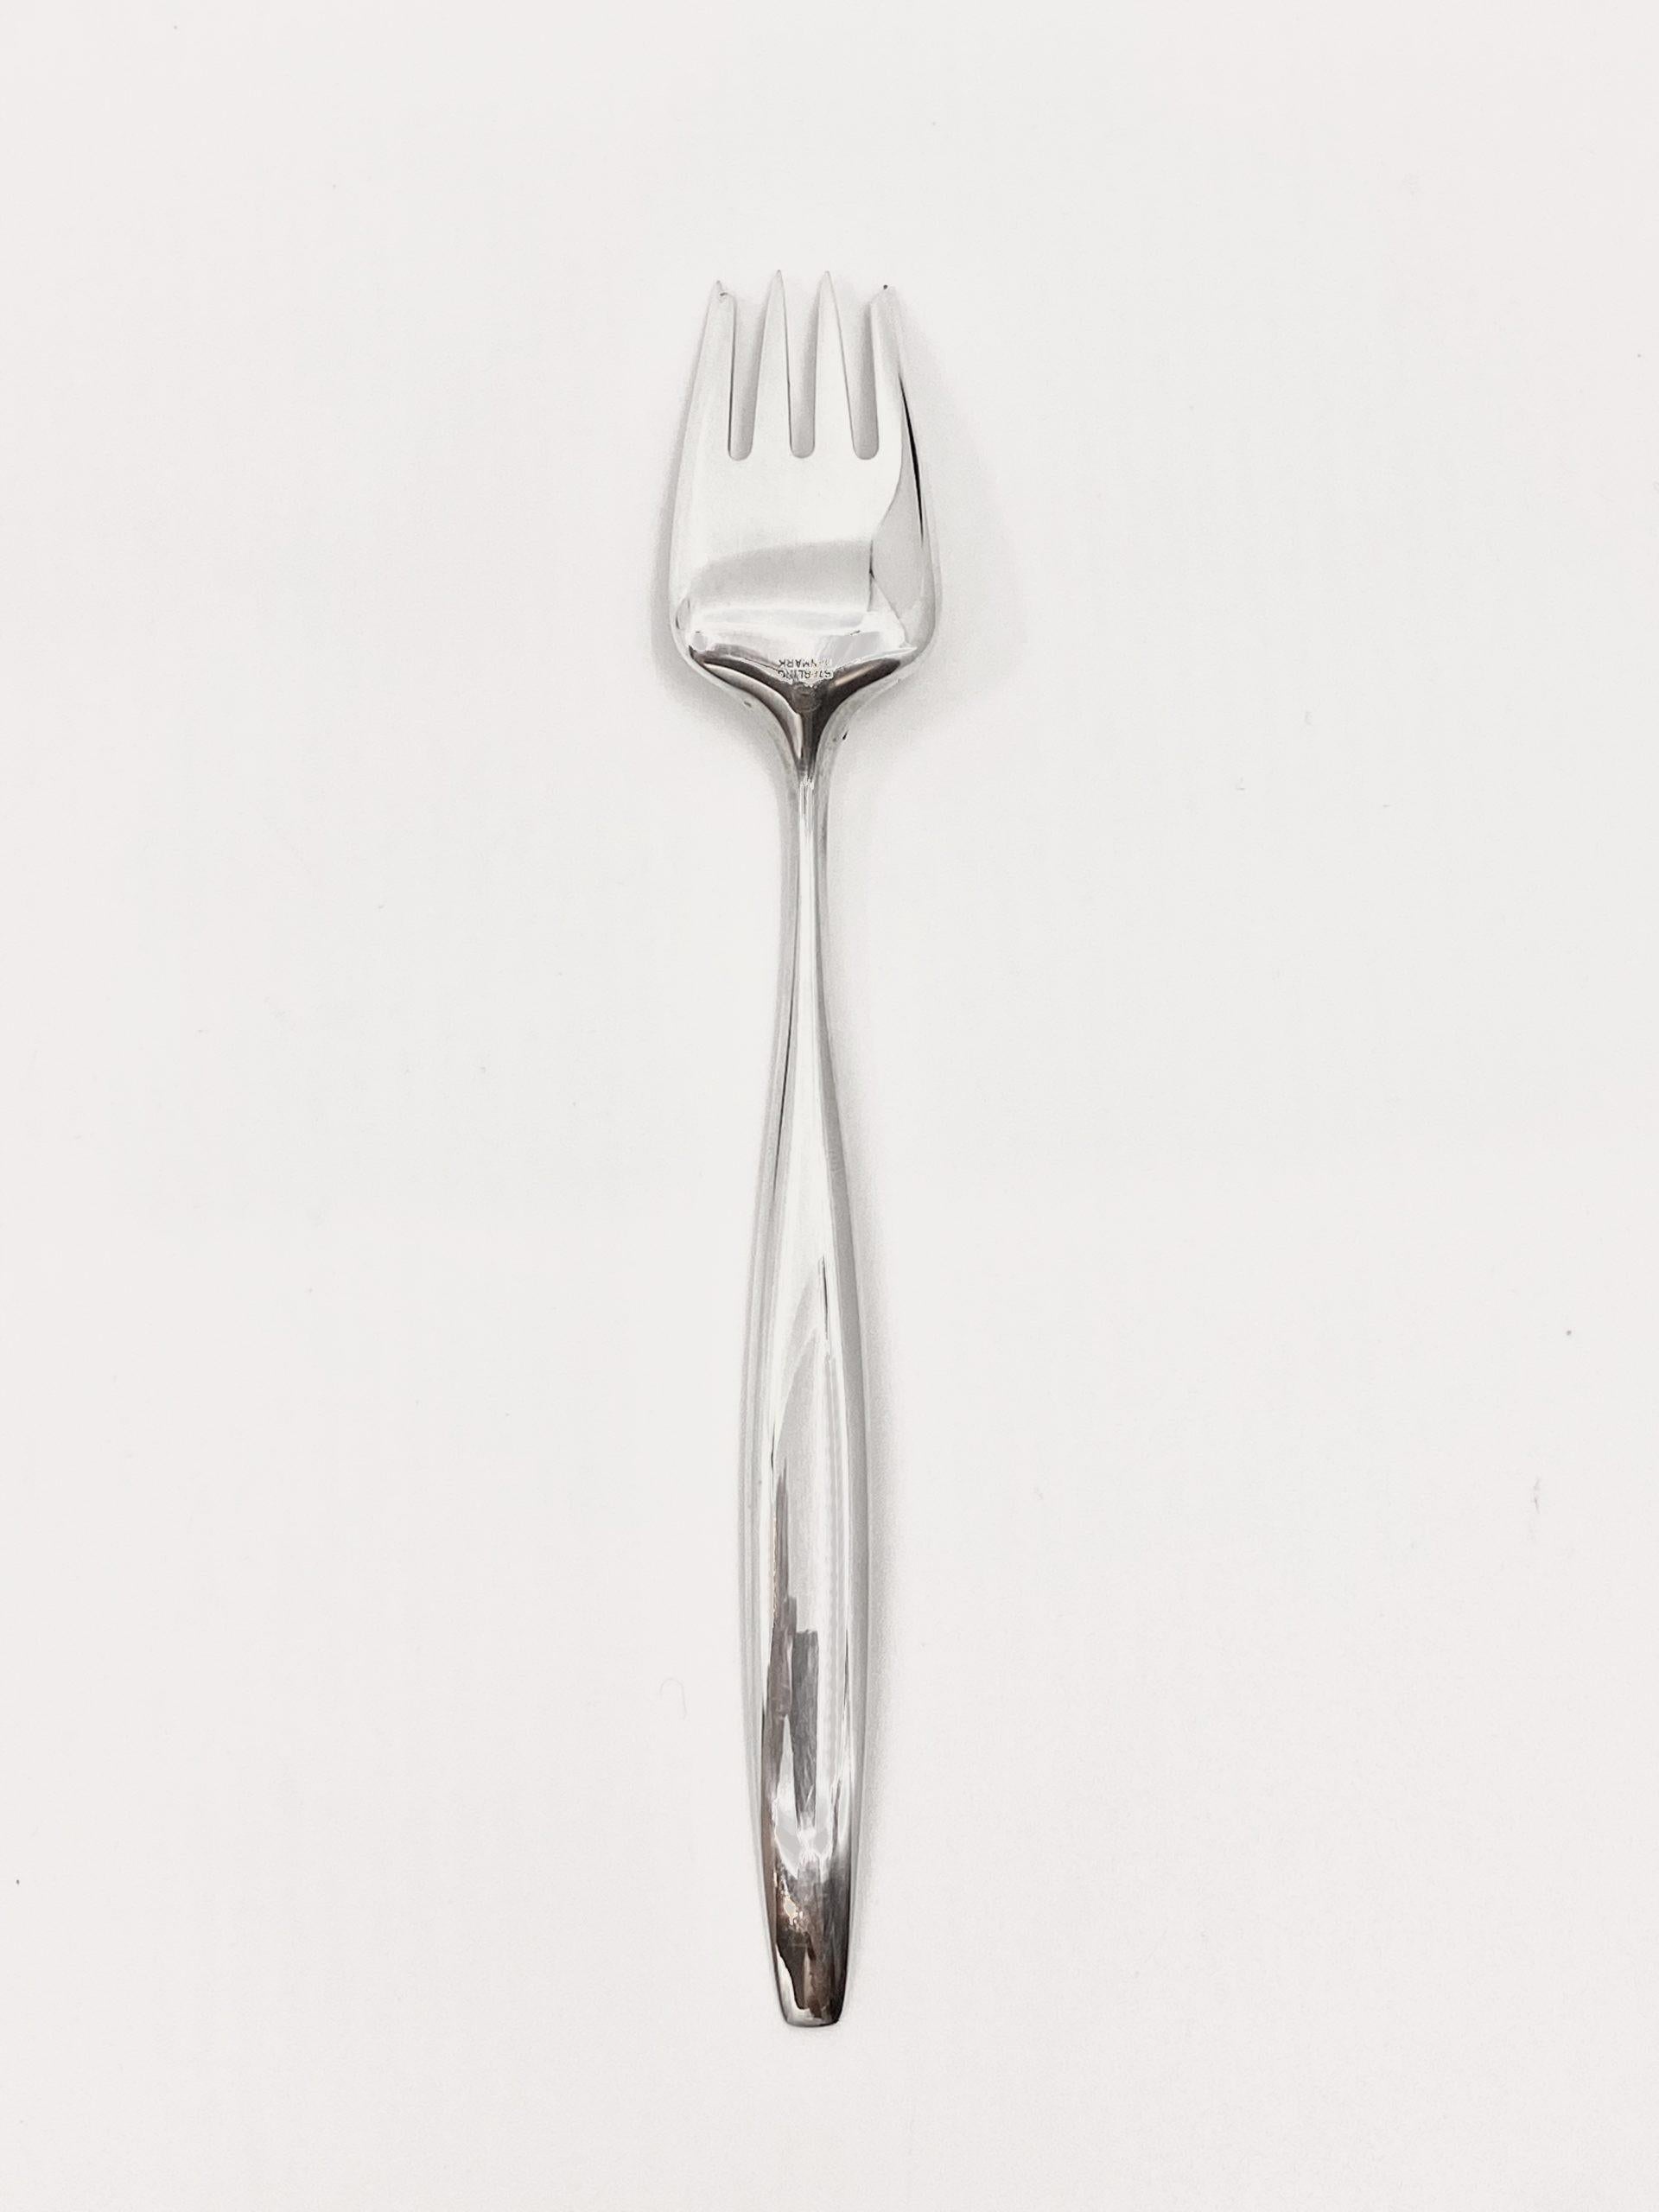 Georg Jensen sterling silver salad/fish fork, item 041/061 in the Cypress pattern, design #99 by Tias Eckhoff. In the Cypress pattern several of the pieces were dual functional, in this case this same fork was both salad fork 041 and fish fork 061.